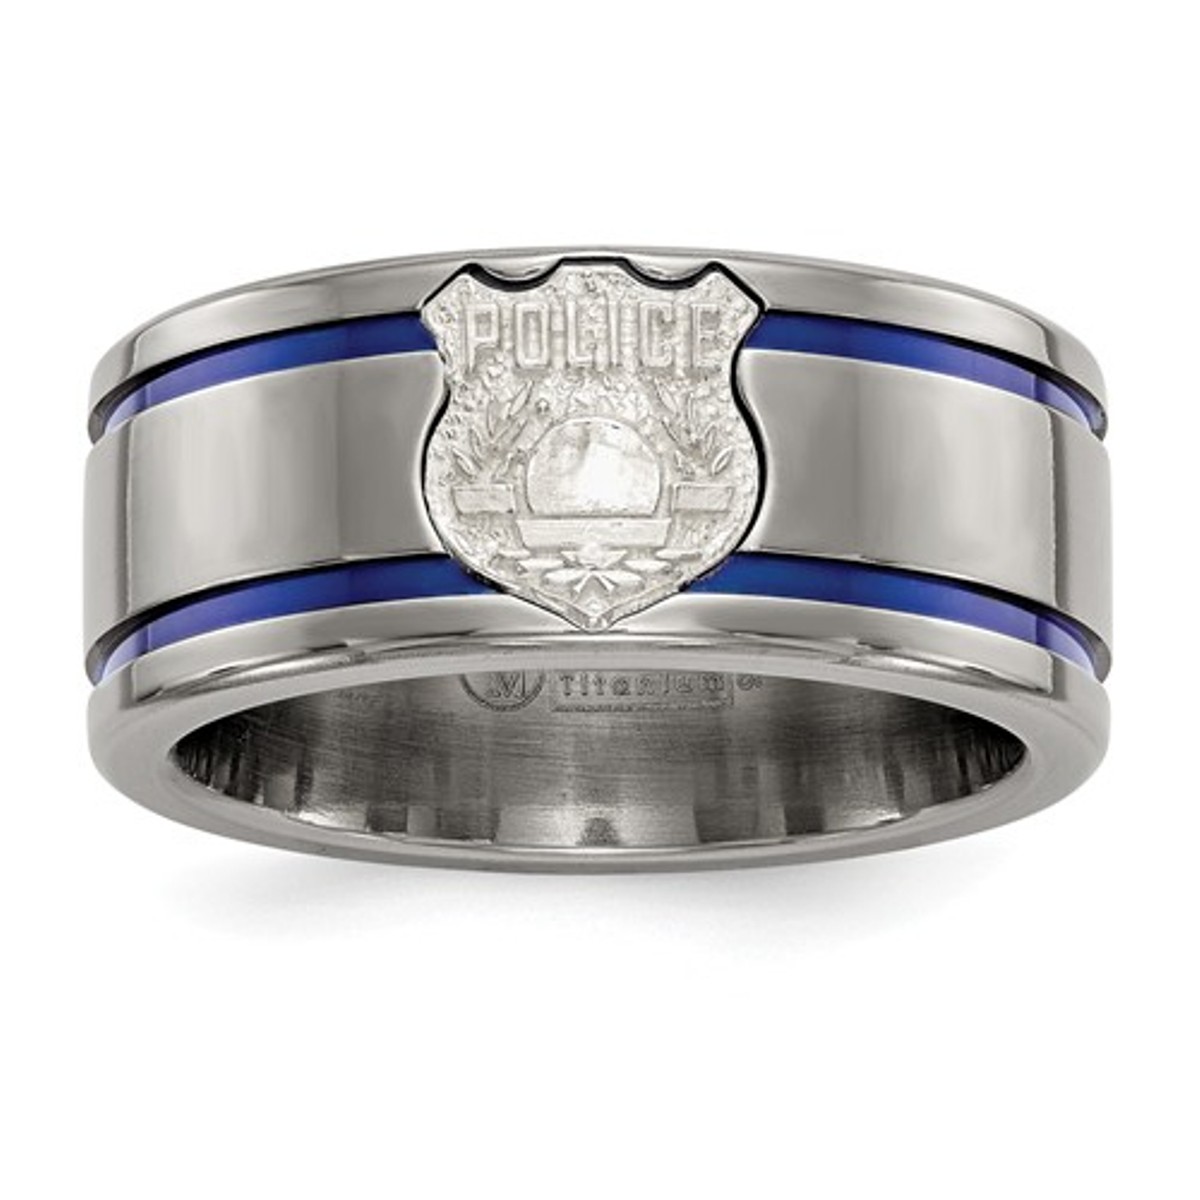  Titanium Blue Anodized With SS Police Shield Tag 10mm Band